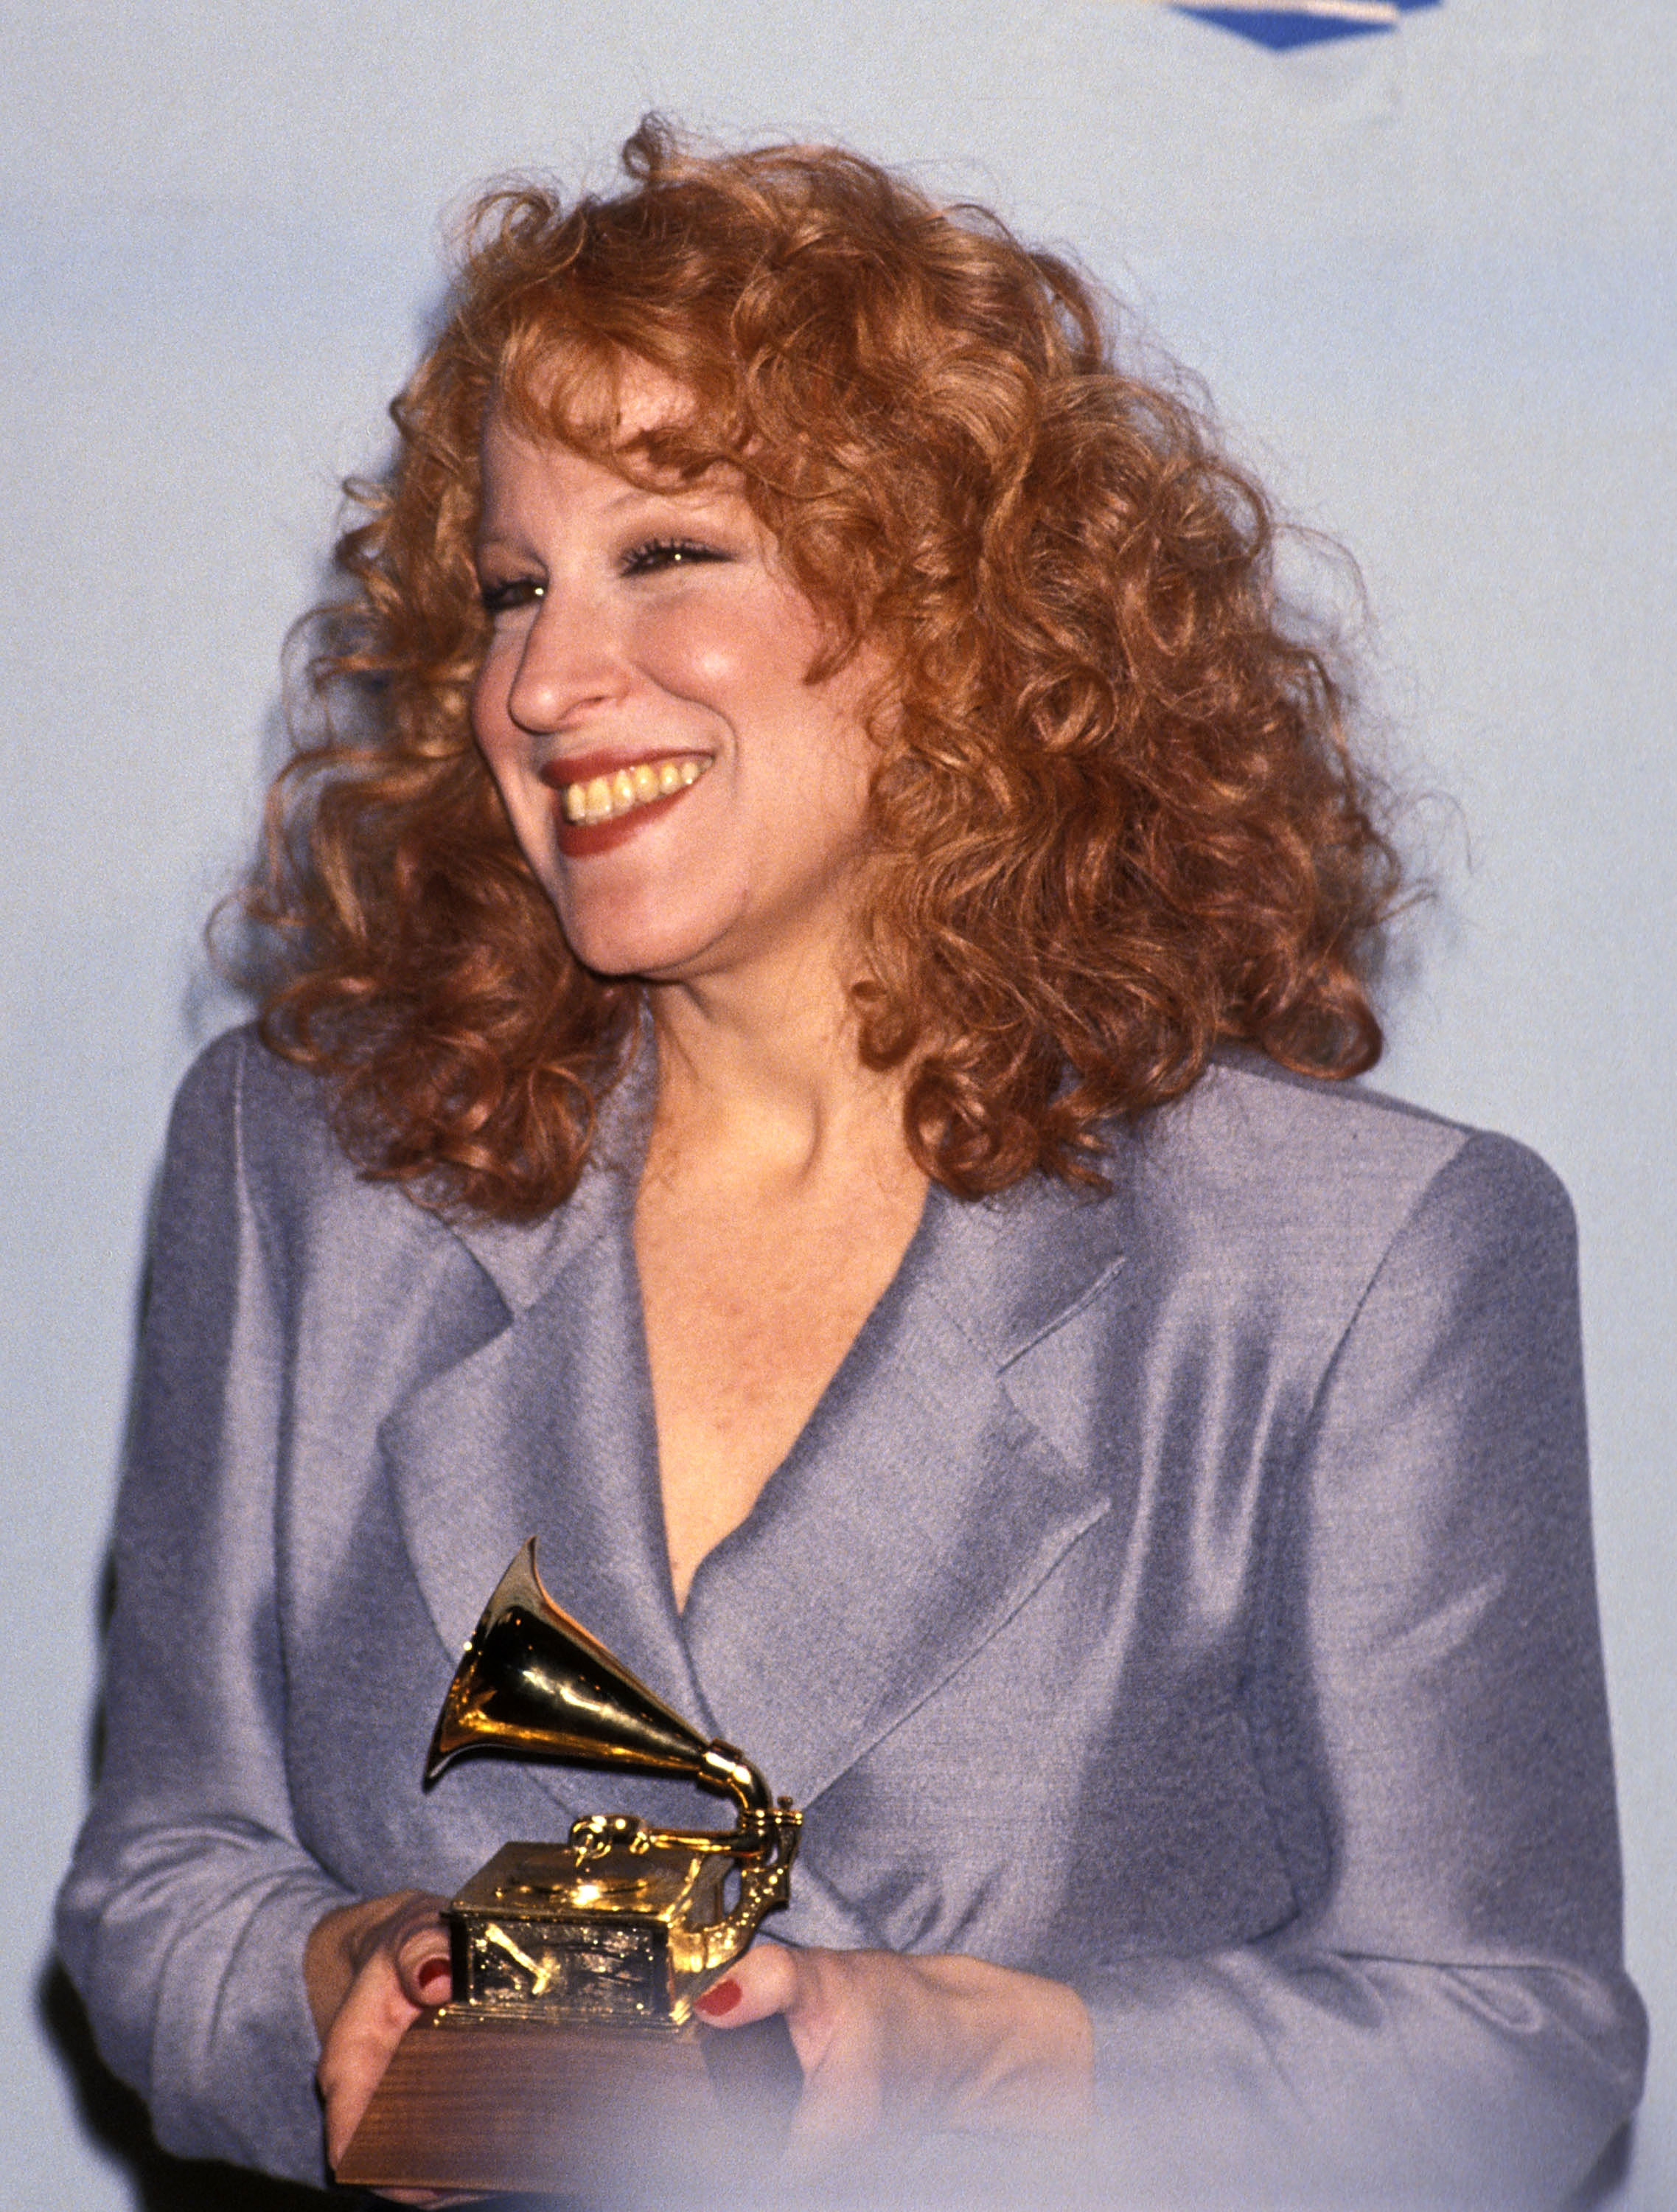 Bette Midler at the 32nd Annual Grammy Awards in Los Angeles, 1990 | Source: Getty Images